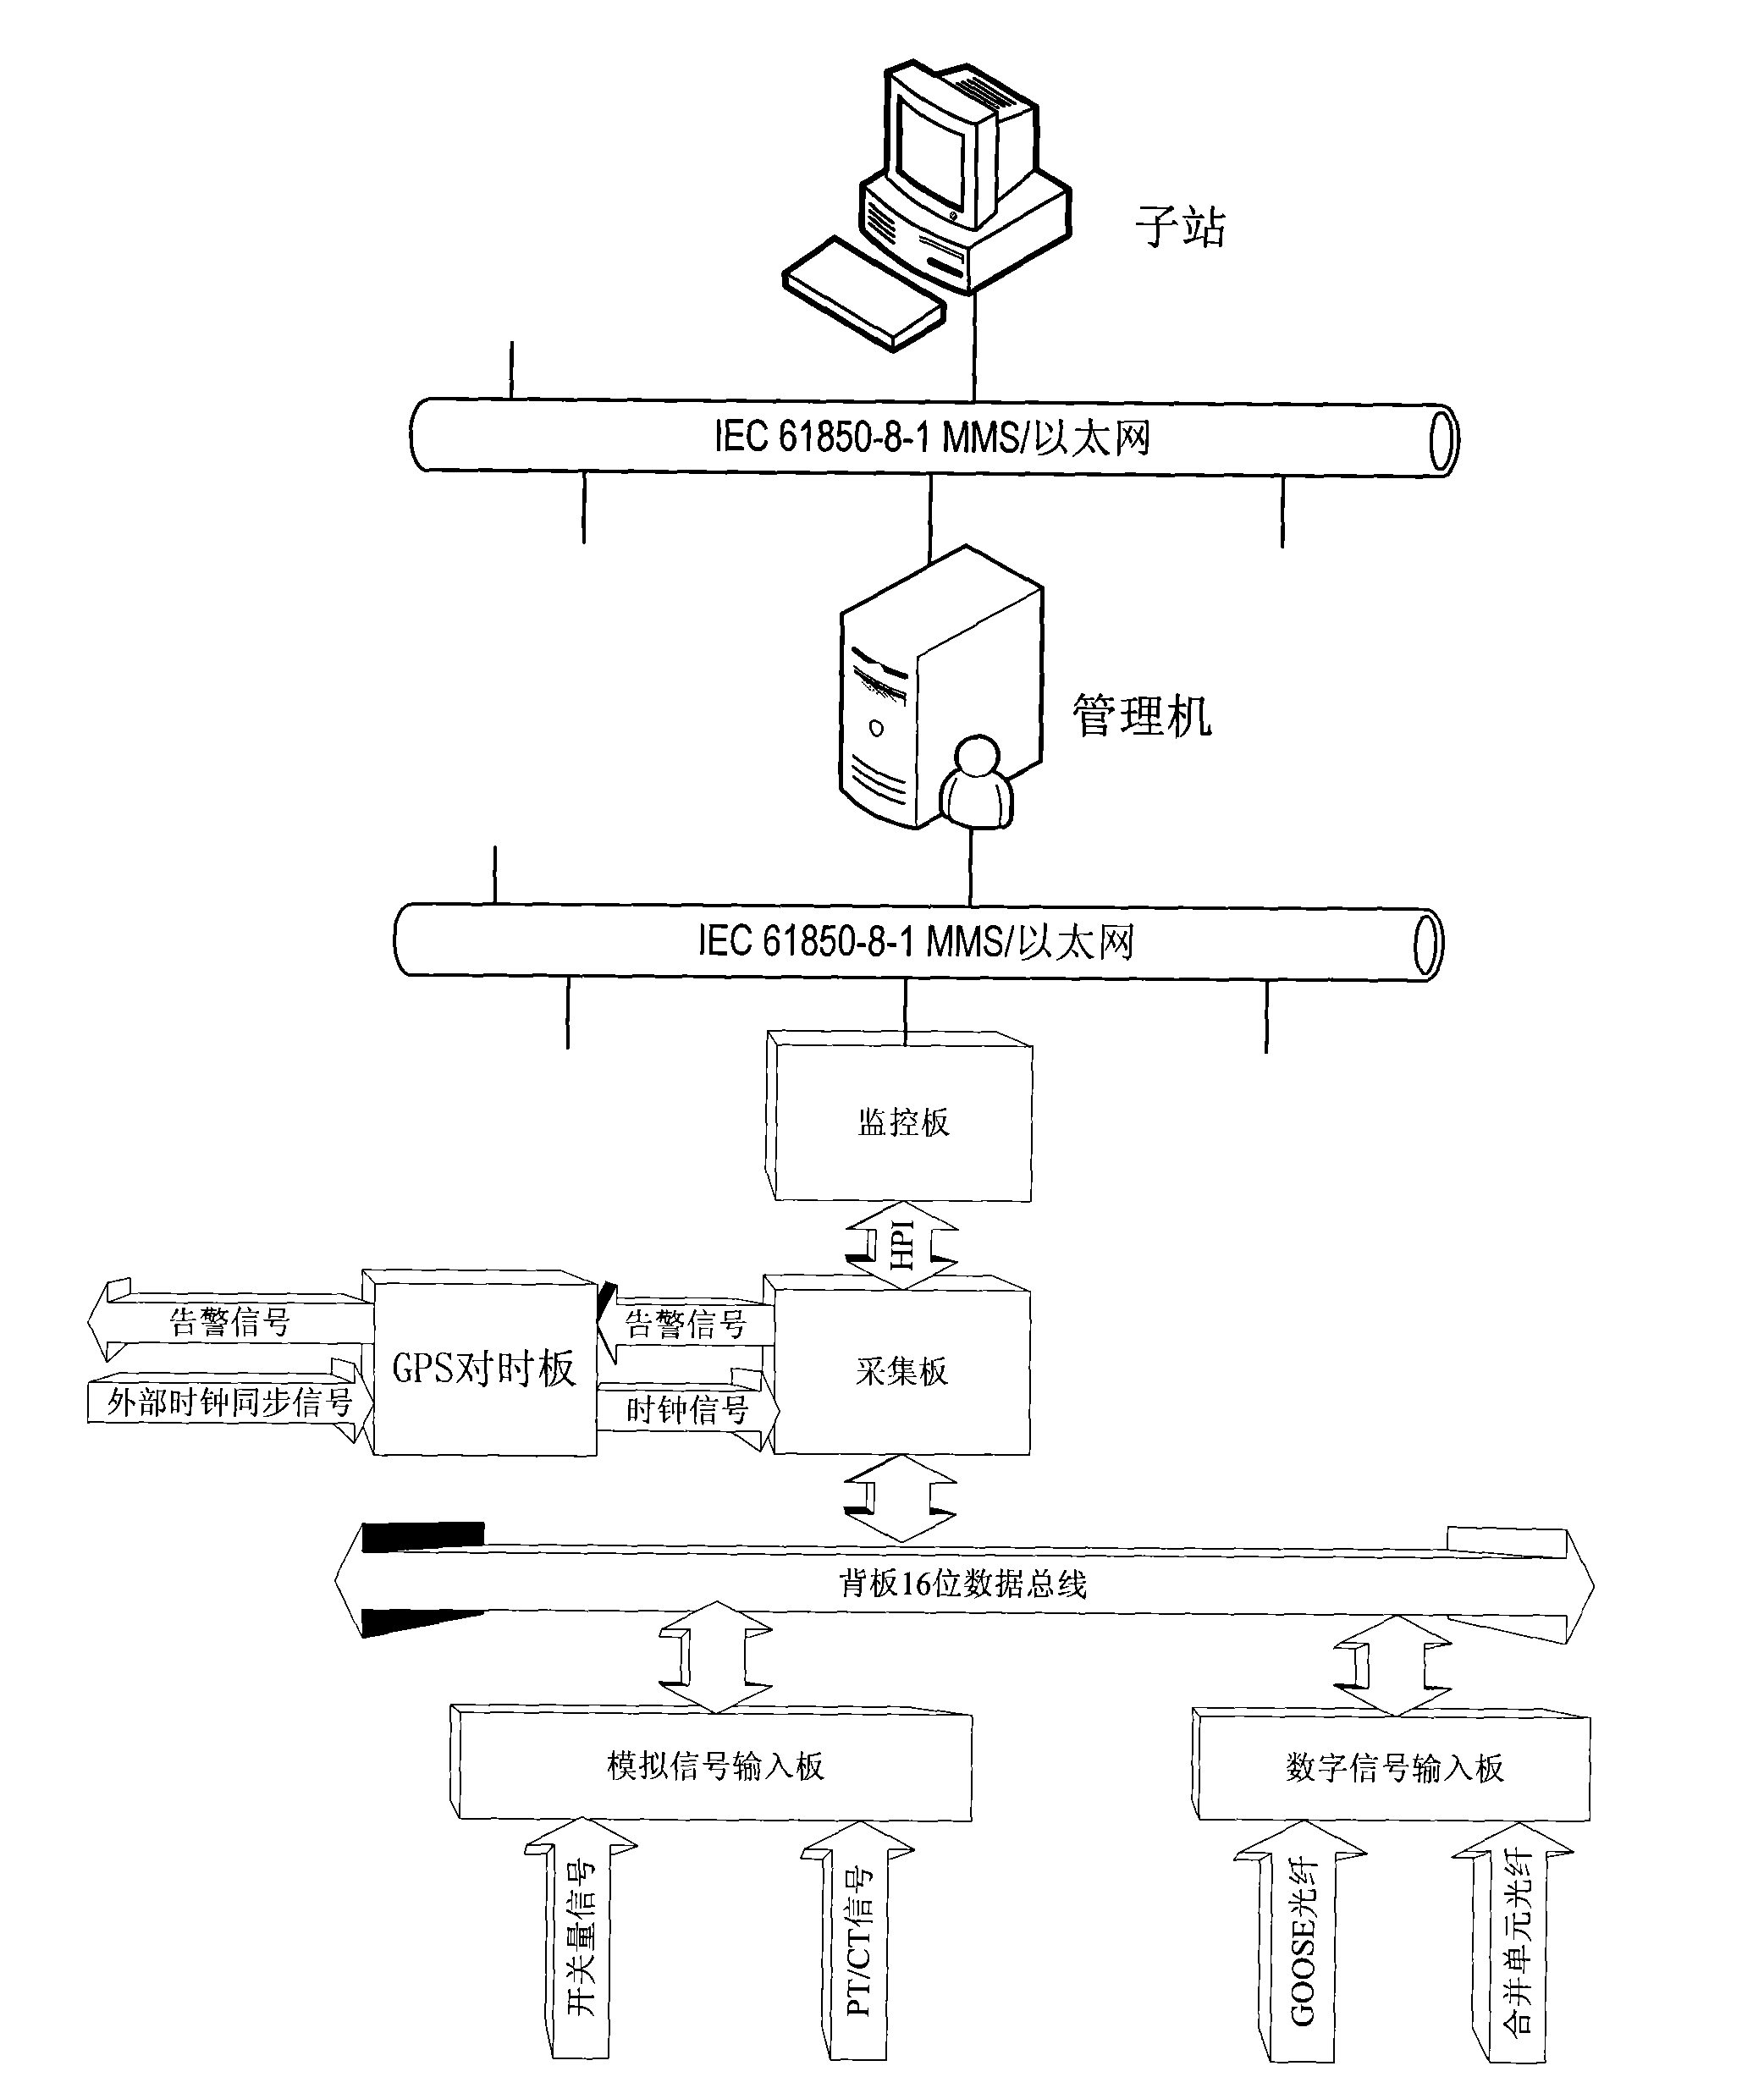 Power quality monitoring and recording device of power system